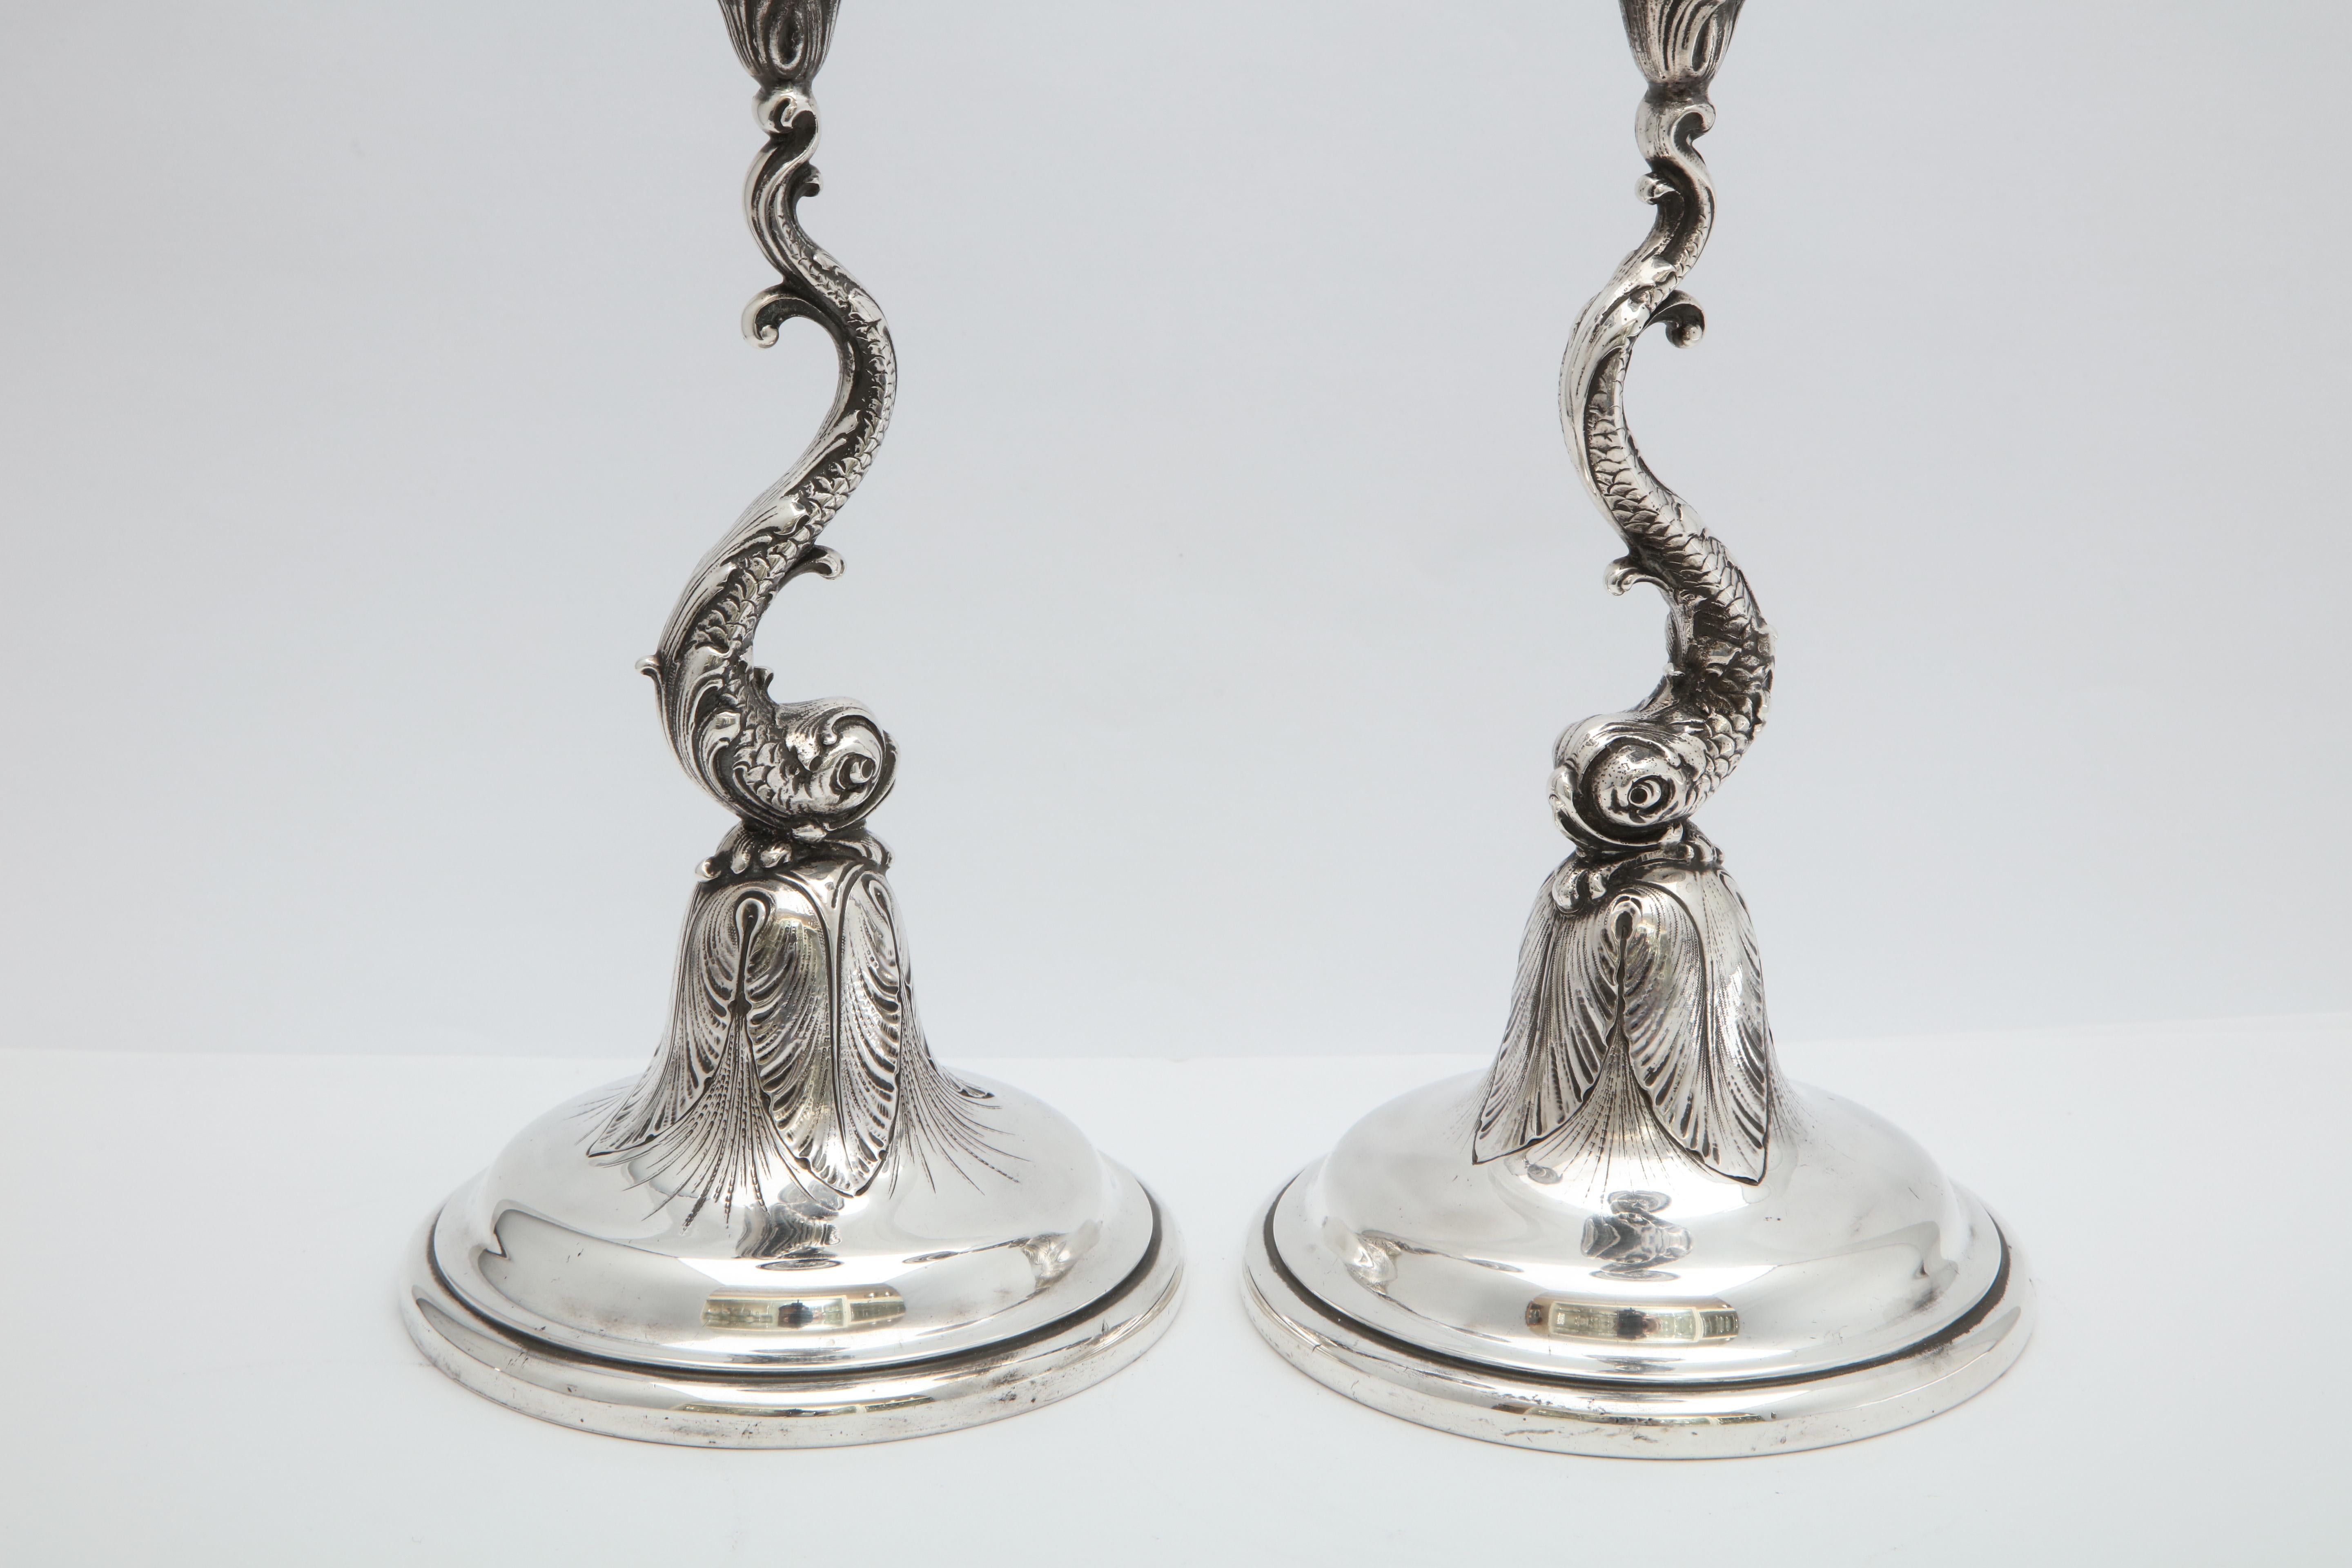 Pair of Art Nouveau Sterling Silver Dolphin-Form Candlesticks by Spaulding 4